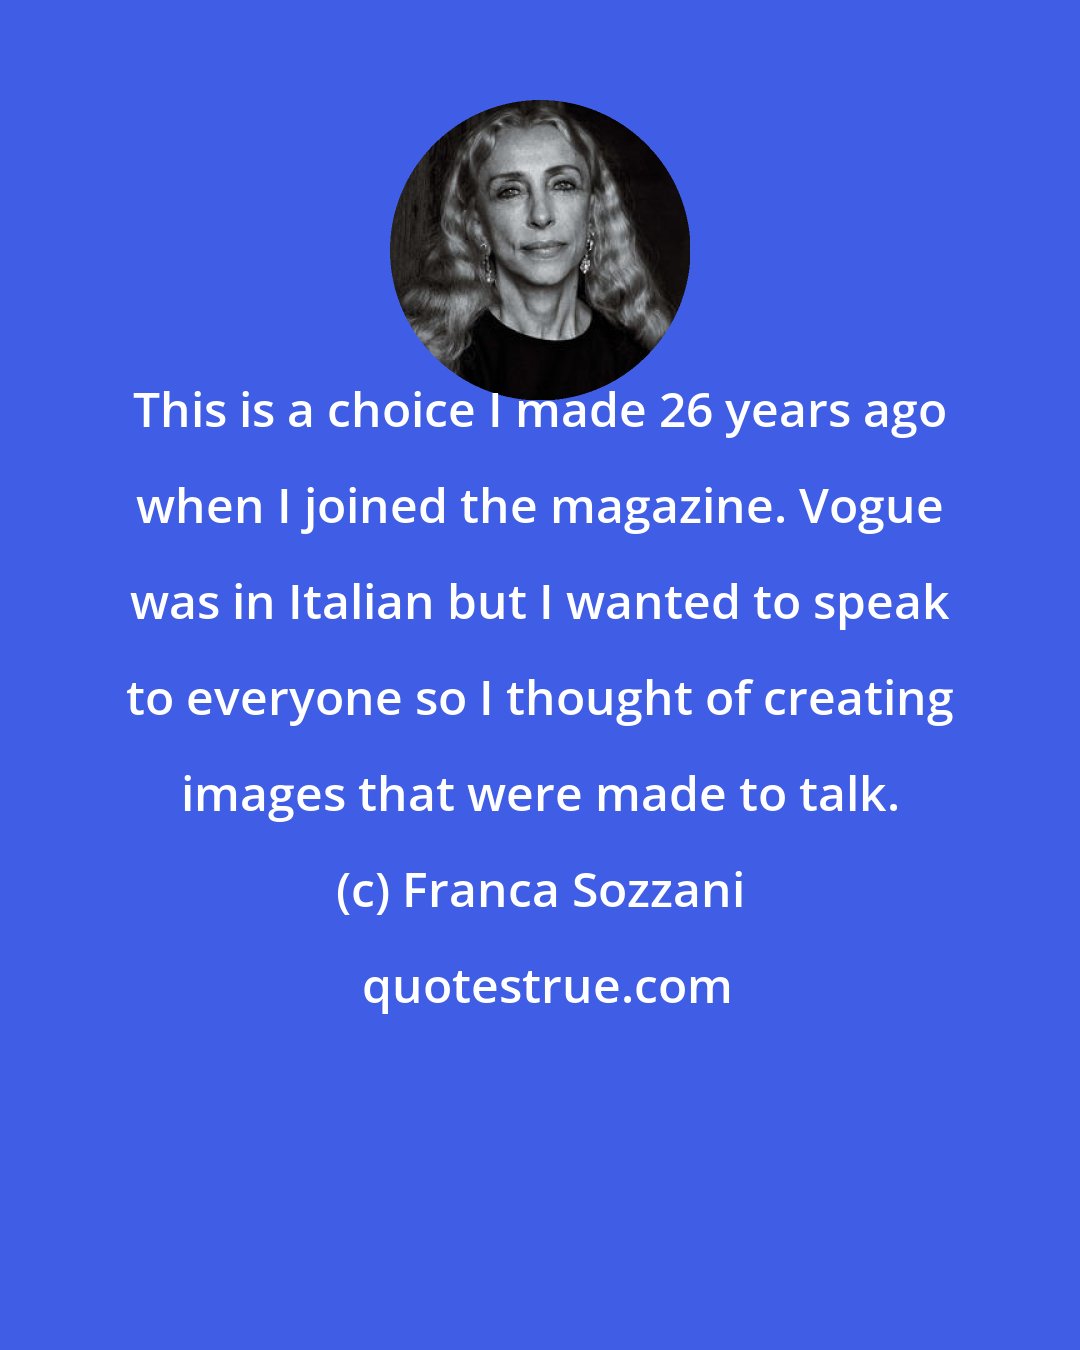 Franca Sozzani: This is a choice I made 26 years ago when I joined the magazine. Vogue was in Italian but I wanted to speak to everyone so I thought of creating images that were made to talk.